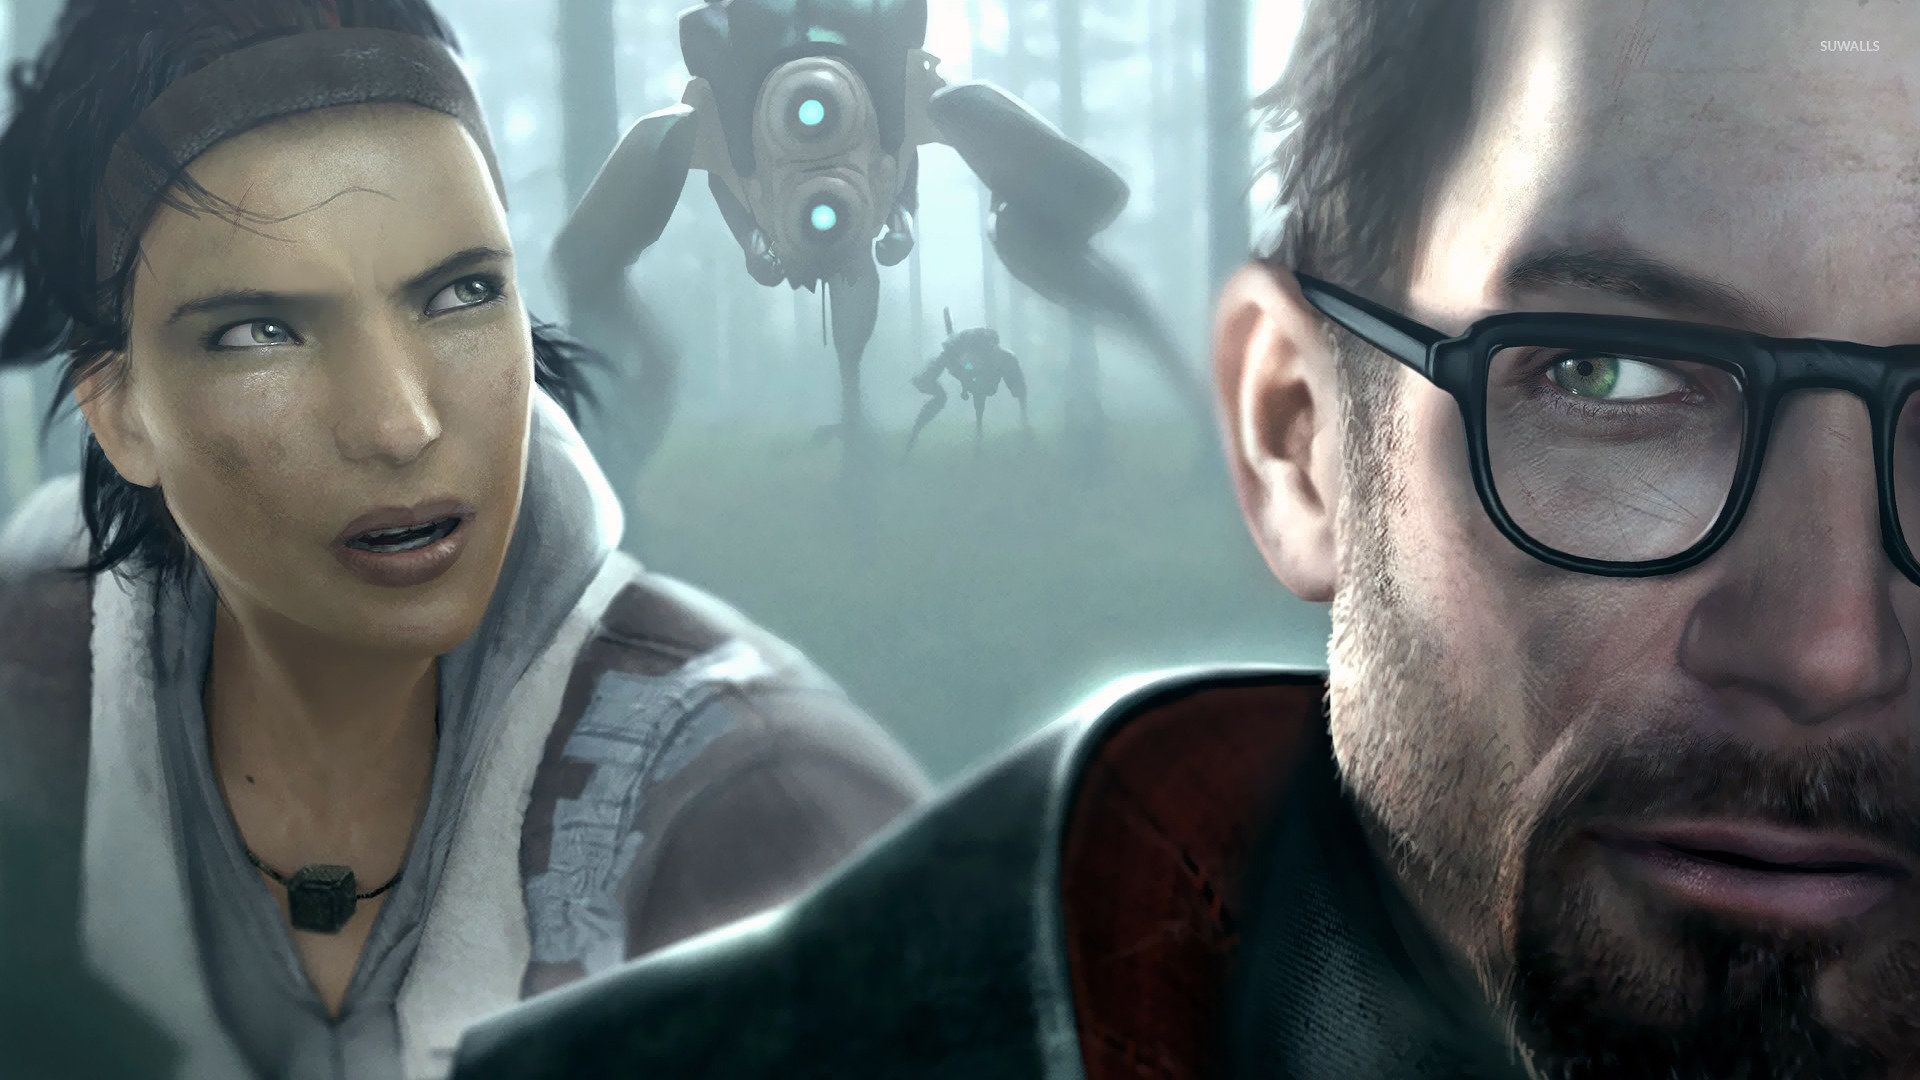 Gabe Newell talks about the past, present and future of Valve, comments on  Half-Life 3